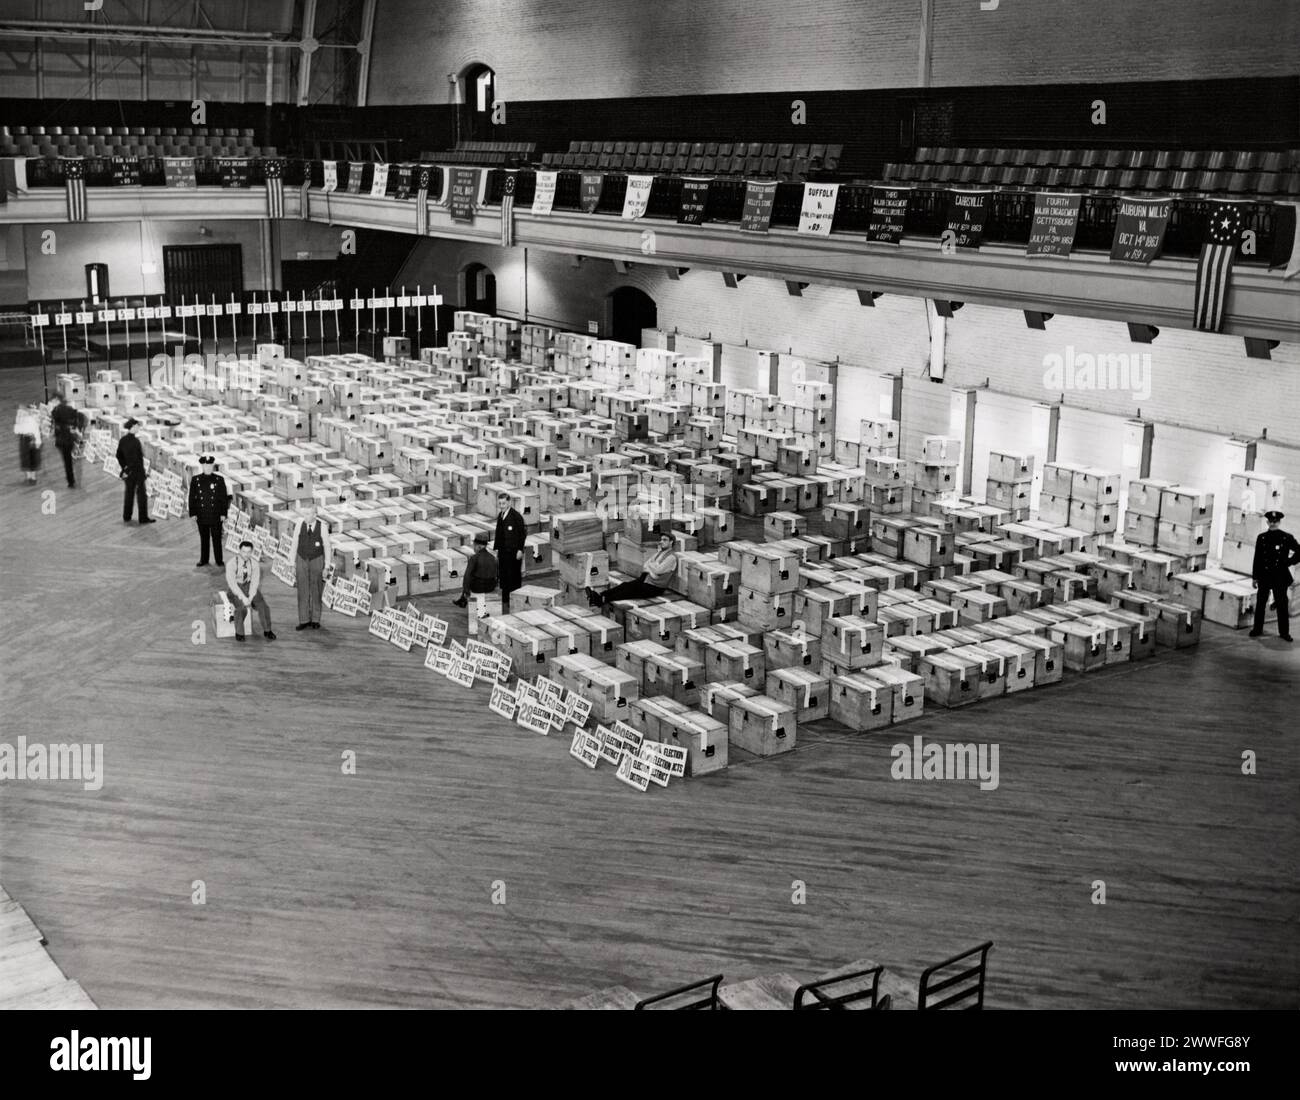 New York, New York, March 11, 1943 New York City police stand guard as hundreds of ballot boxes, sealed with tape, rest on the floor of the 69th armory to await counting. The ballots inside will determine the city's new city council. Stock Photo